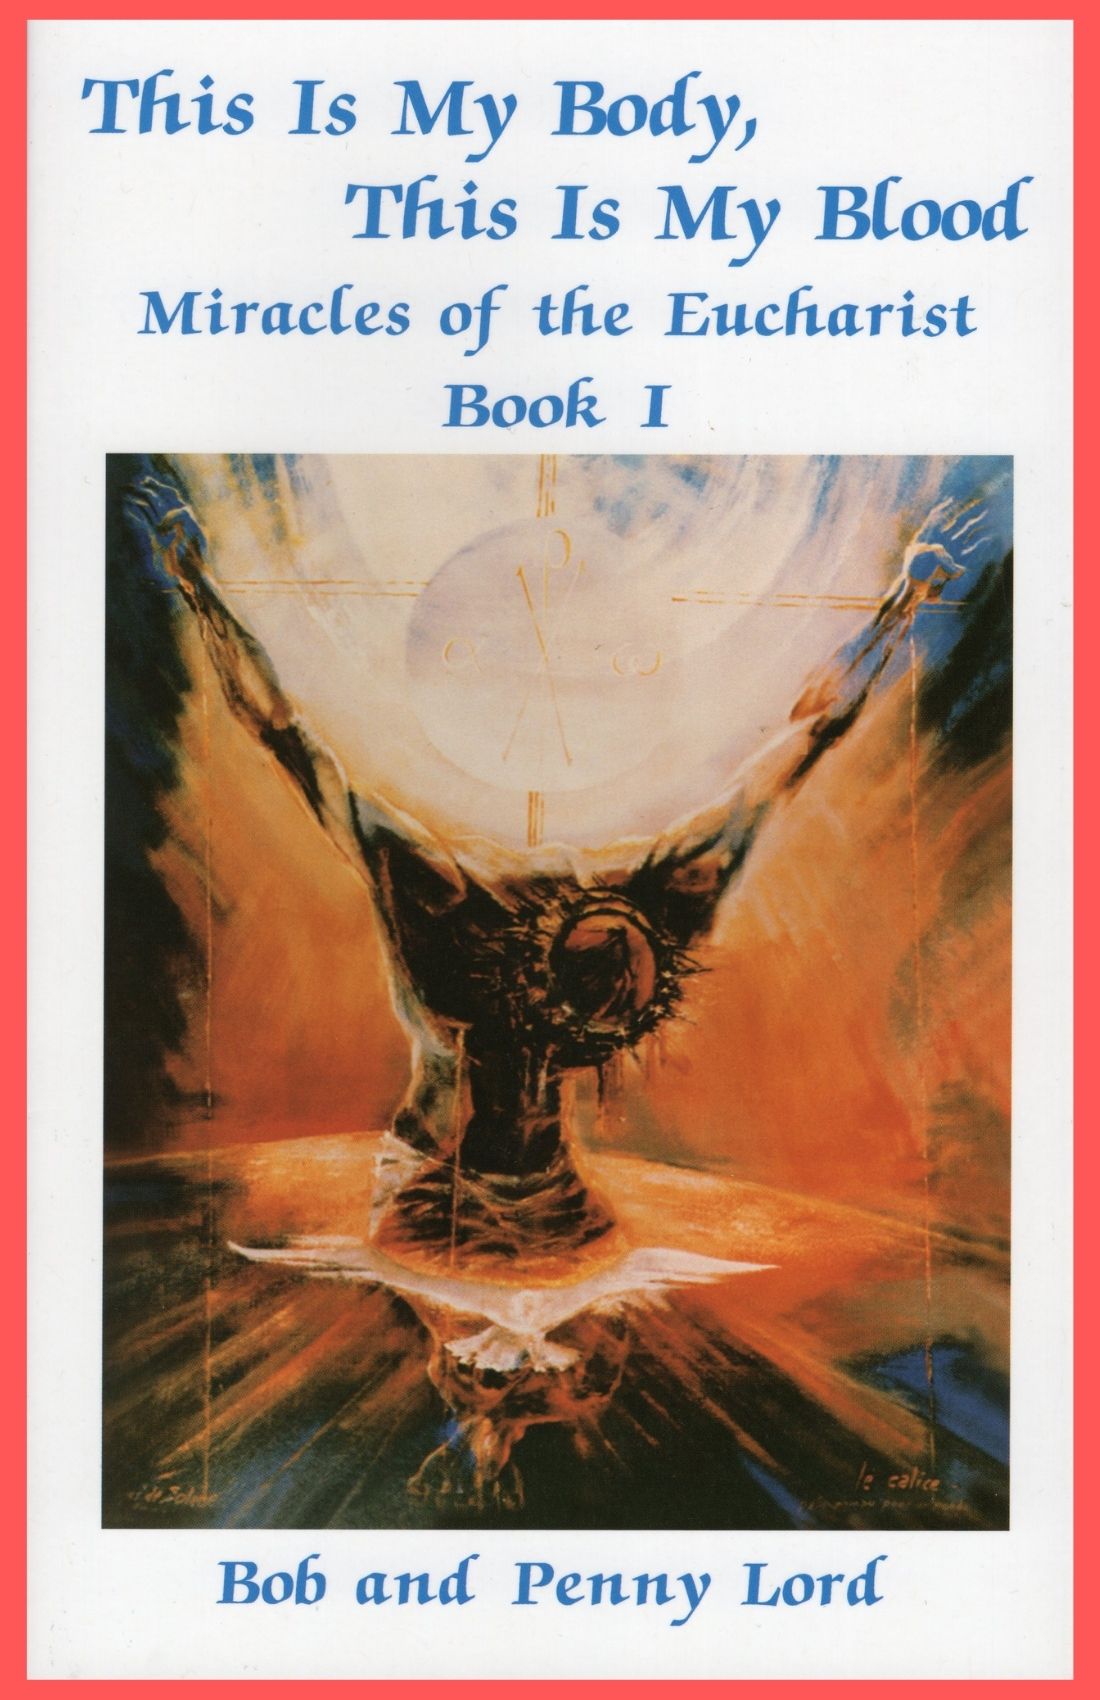 Miracles of the Eucharist Book1 - Bob and Penny Lord